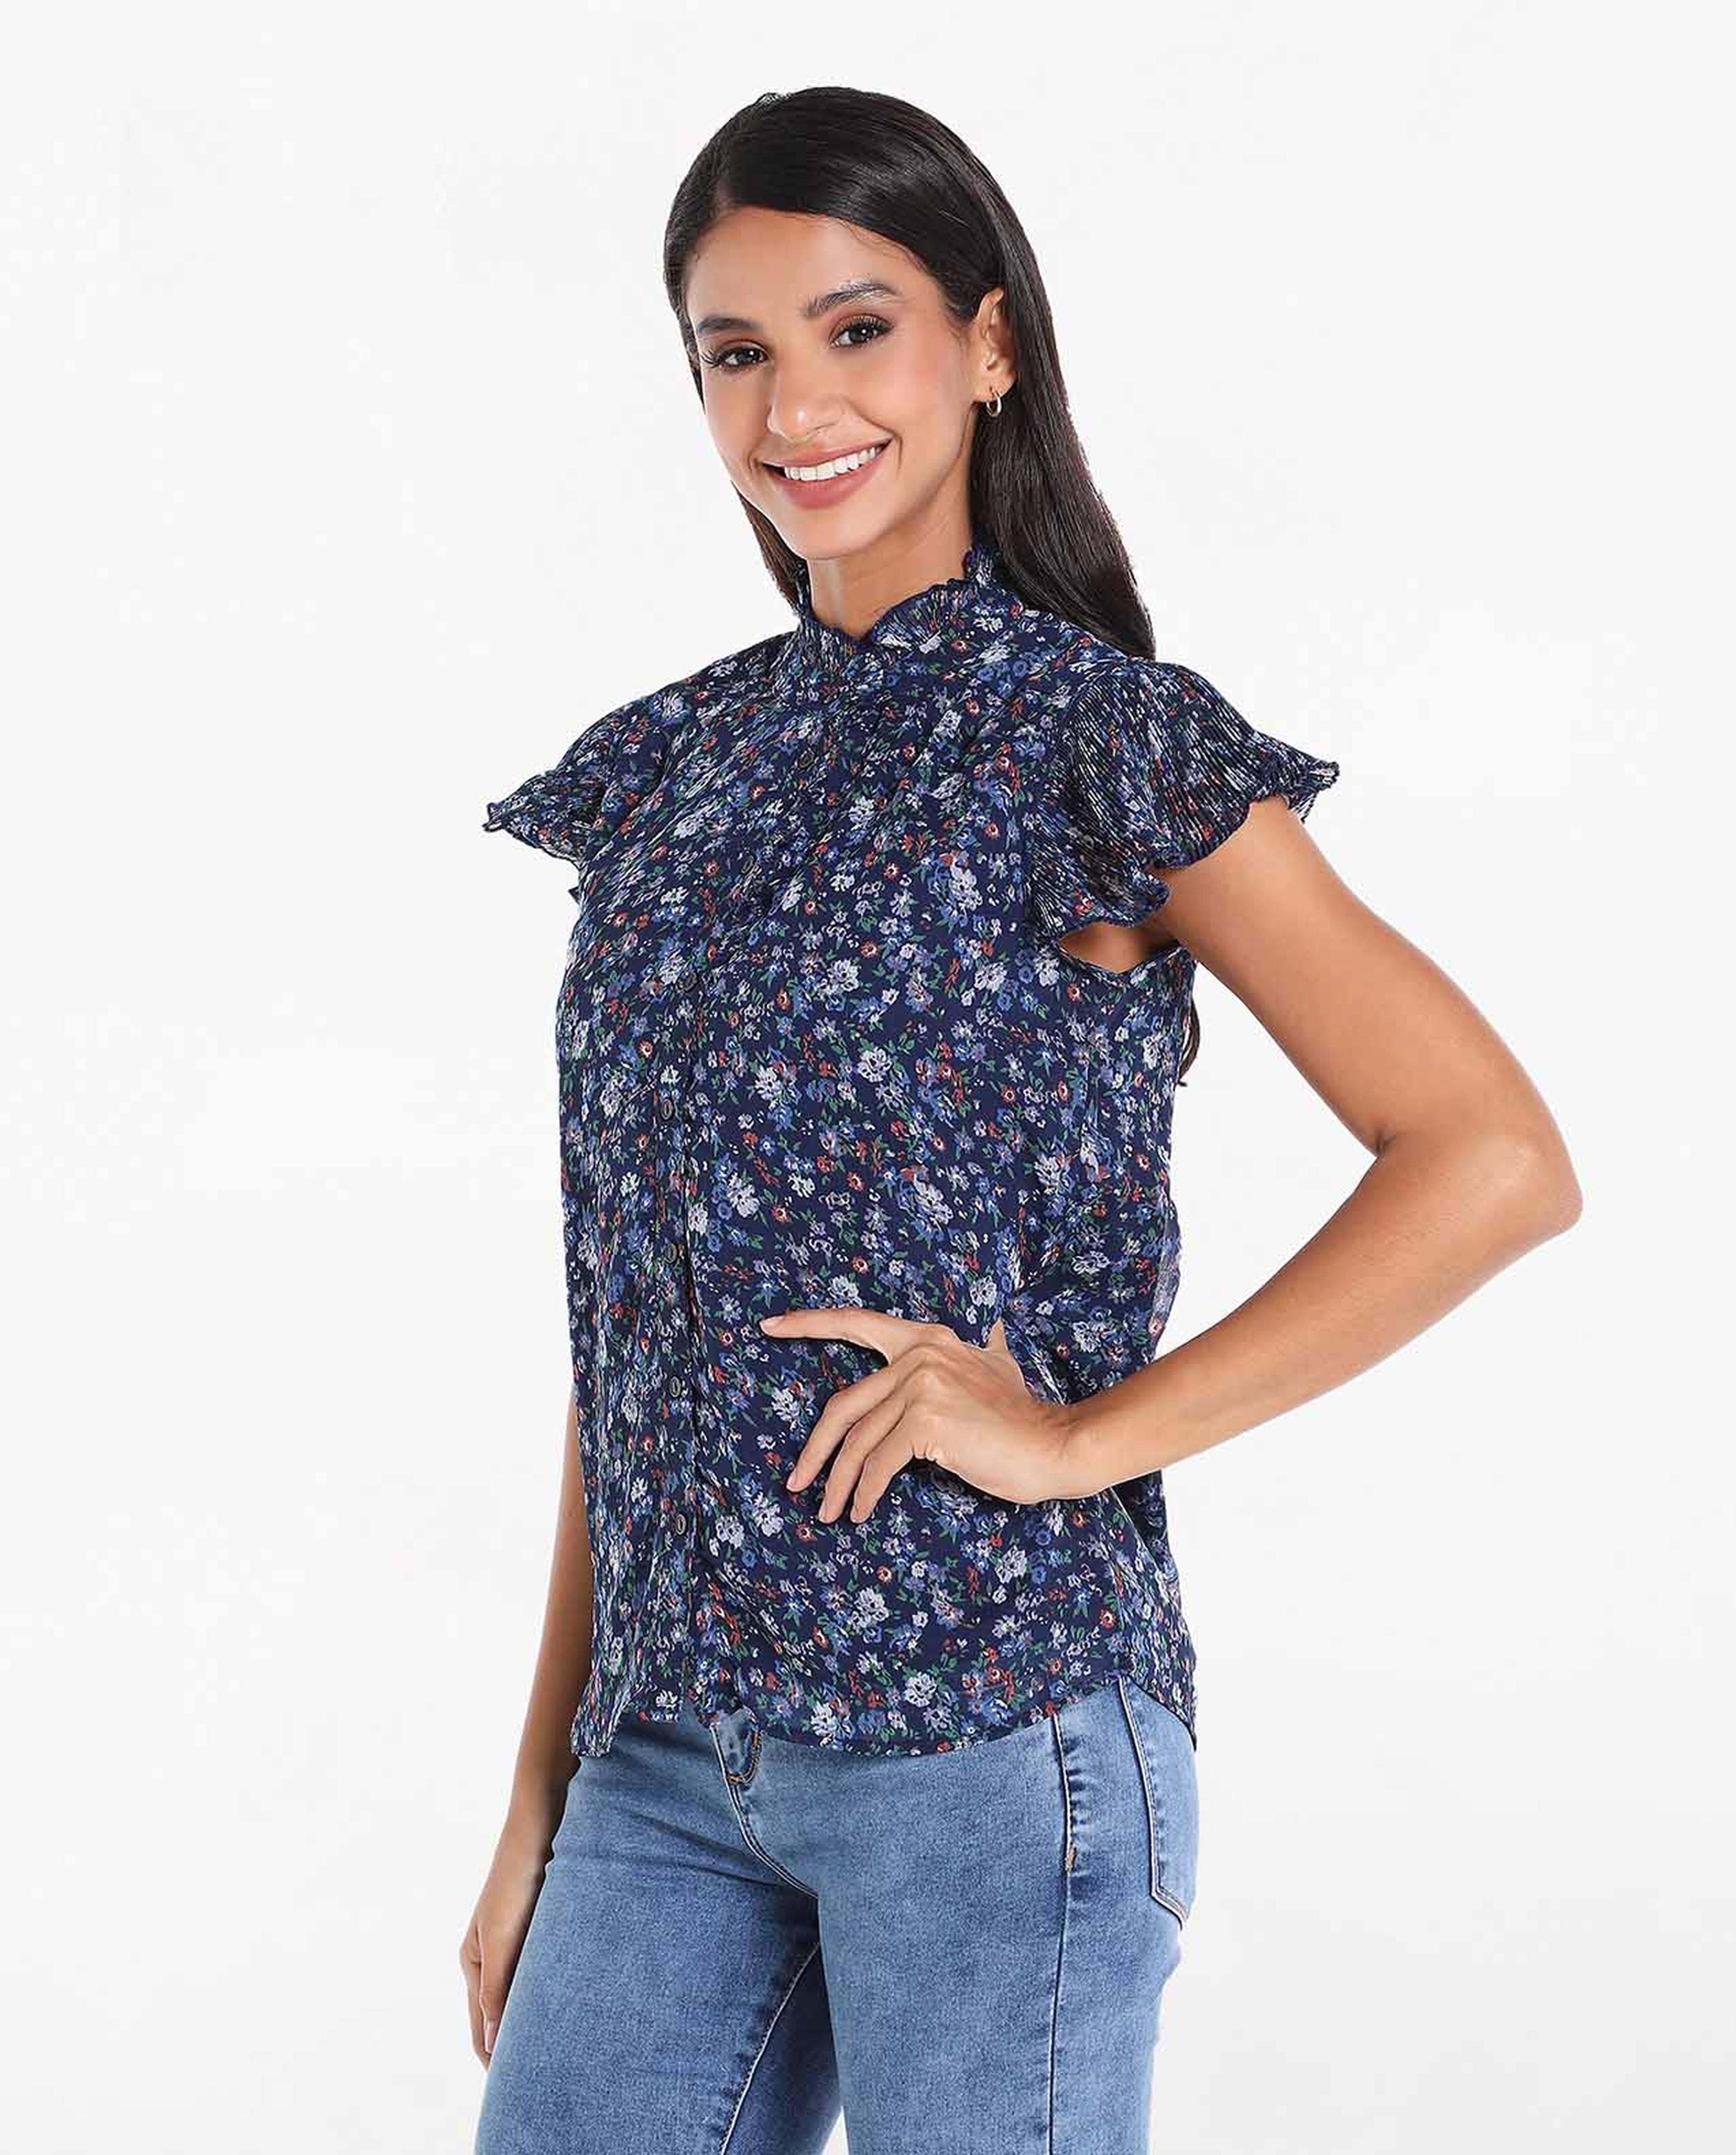 Floral Printed Top with Lettuce Neck and Cap Sleeves